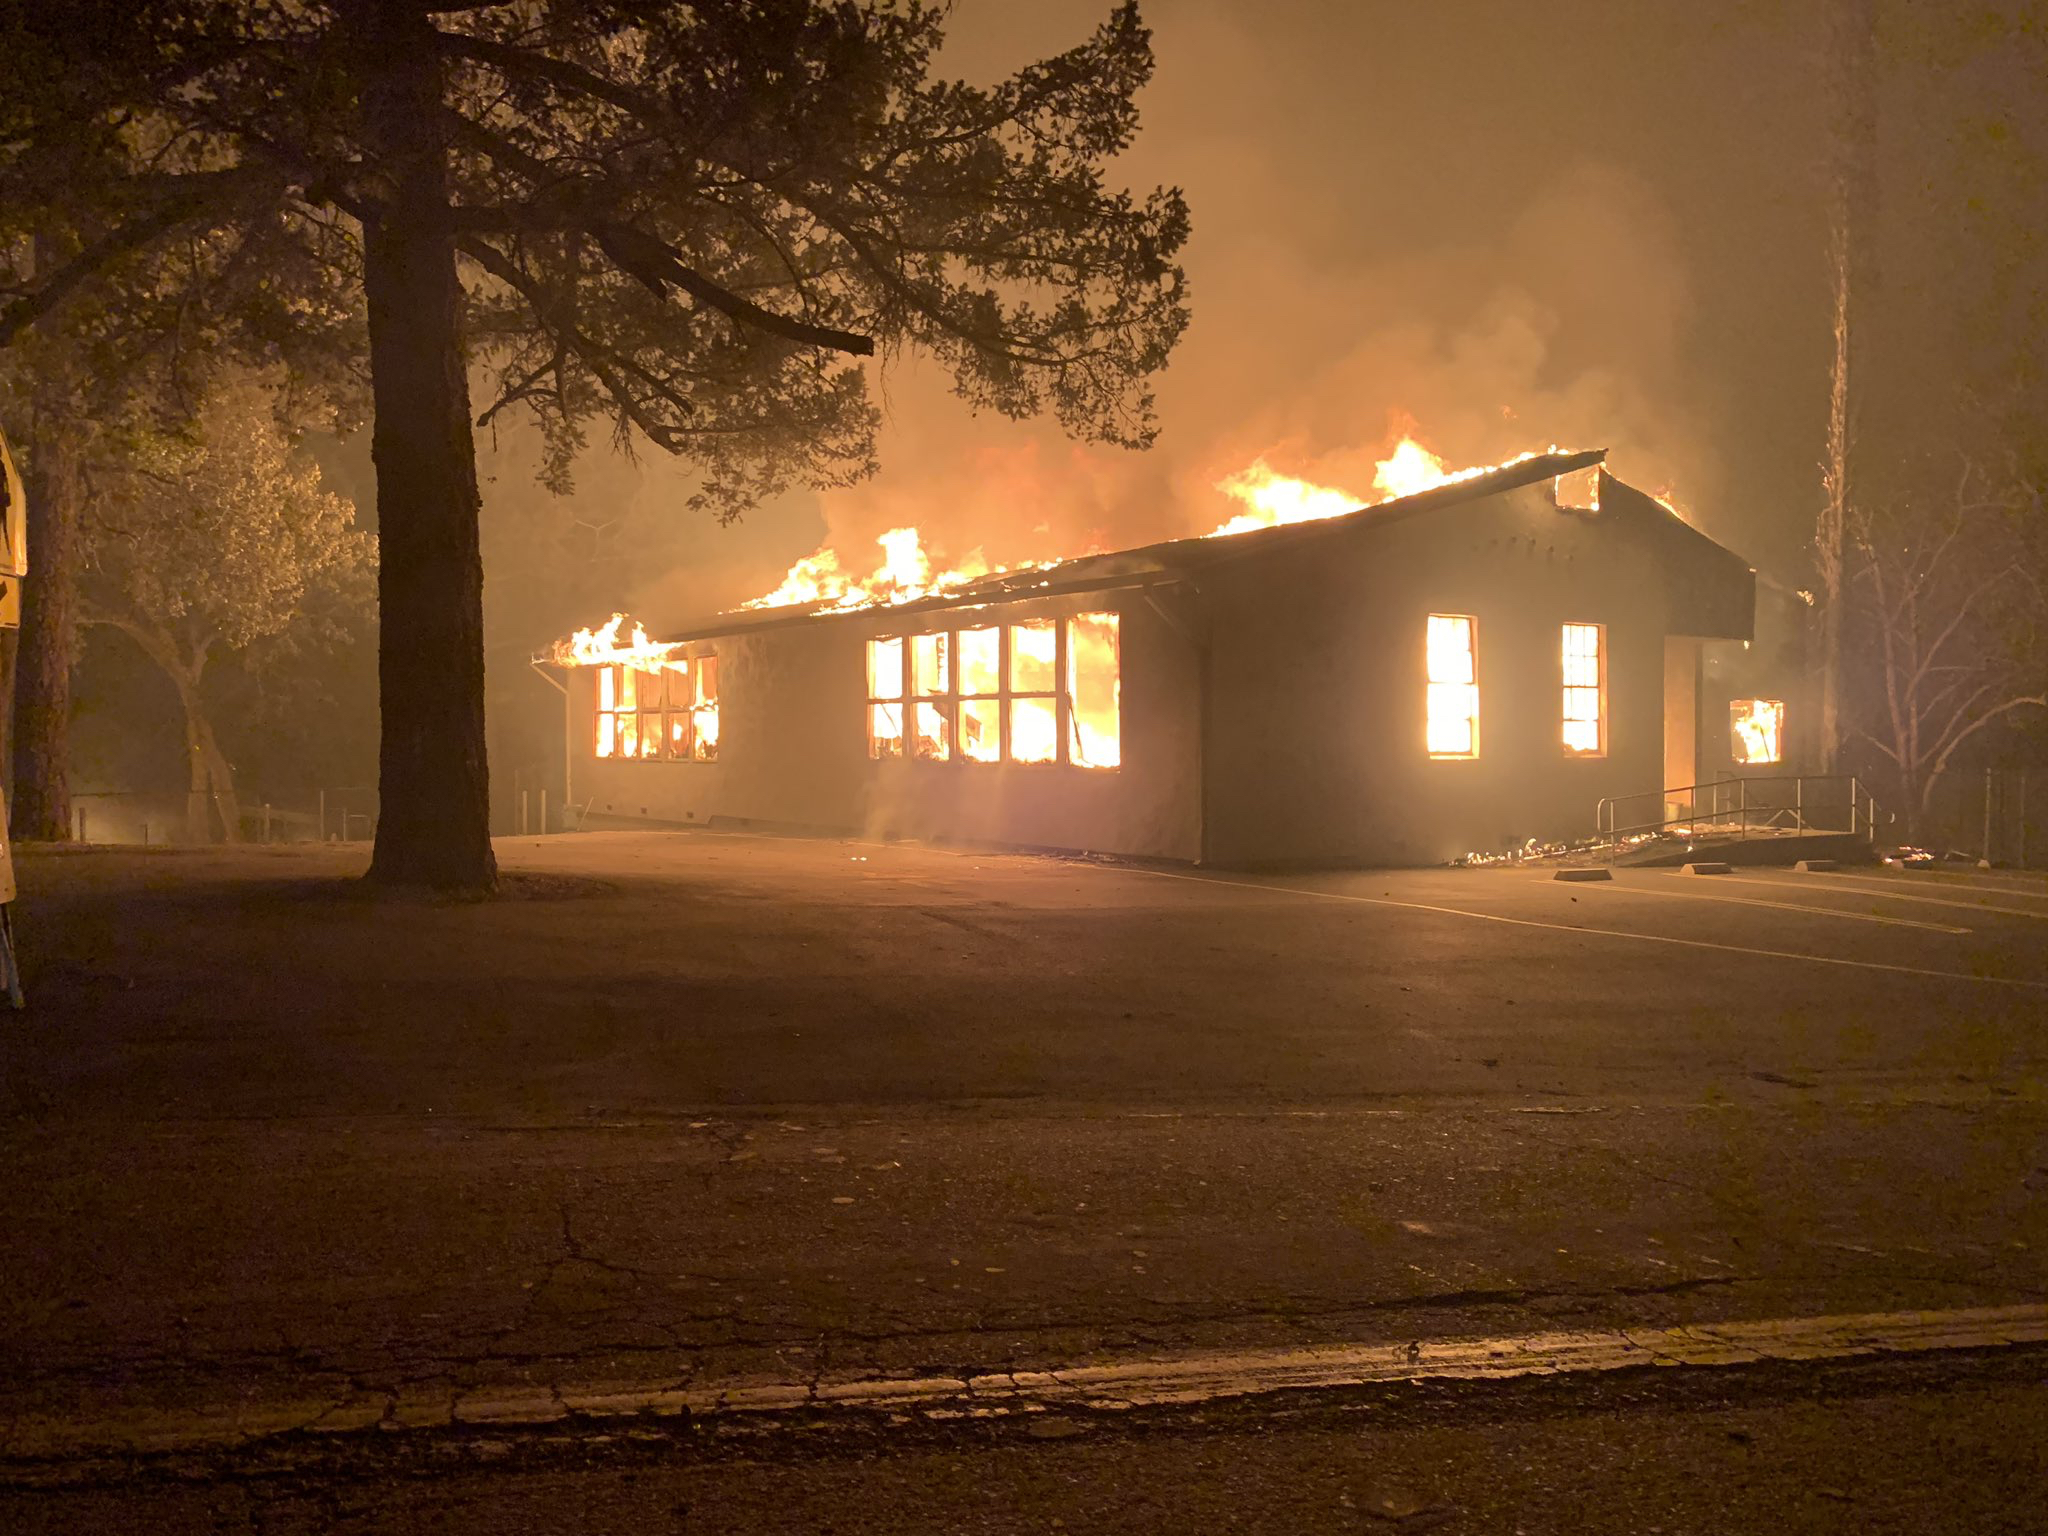 In Deer Park, California, Foothills Adventist Elementary School’s original building, the Haven Adventist Church Community Service Center, and many surrounding homes and buildings have been destroyed by the Glass Fire.